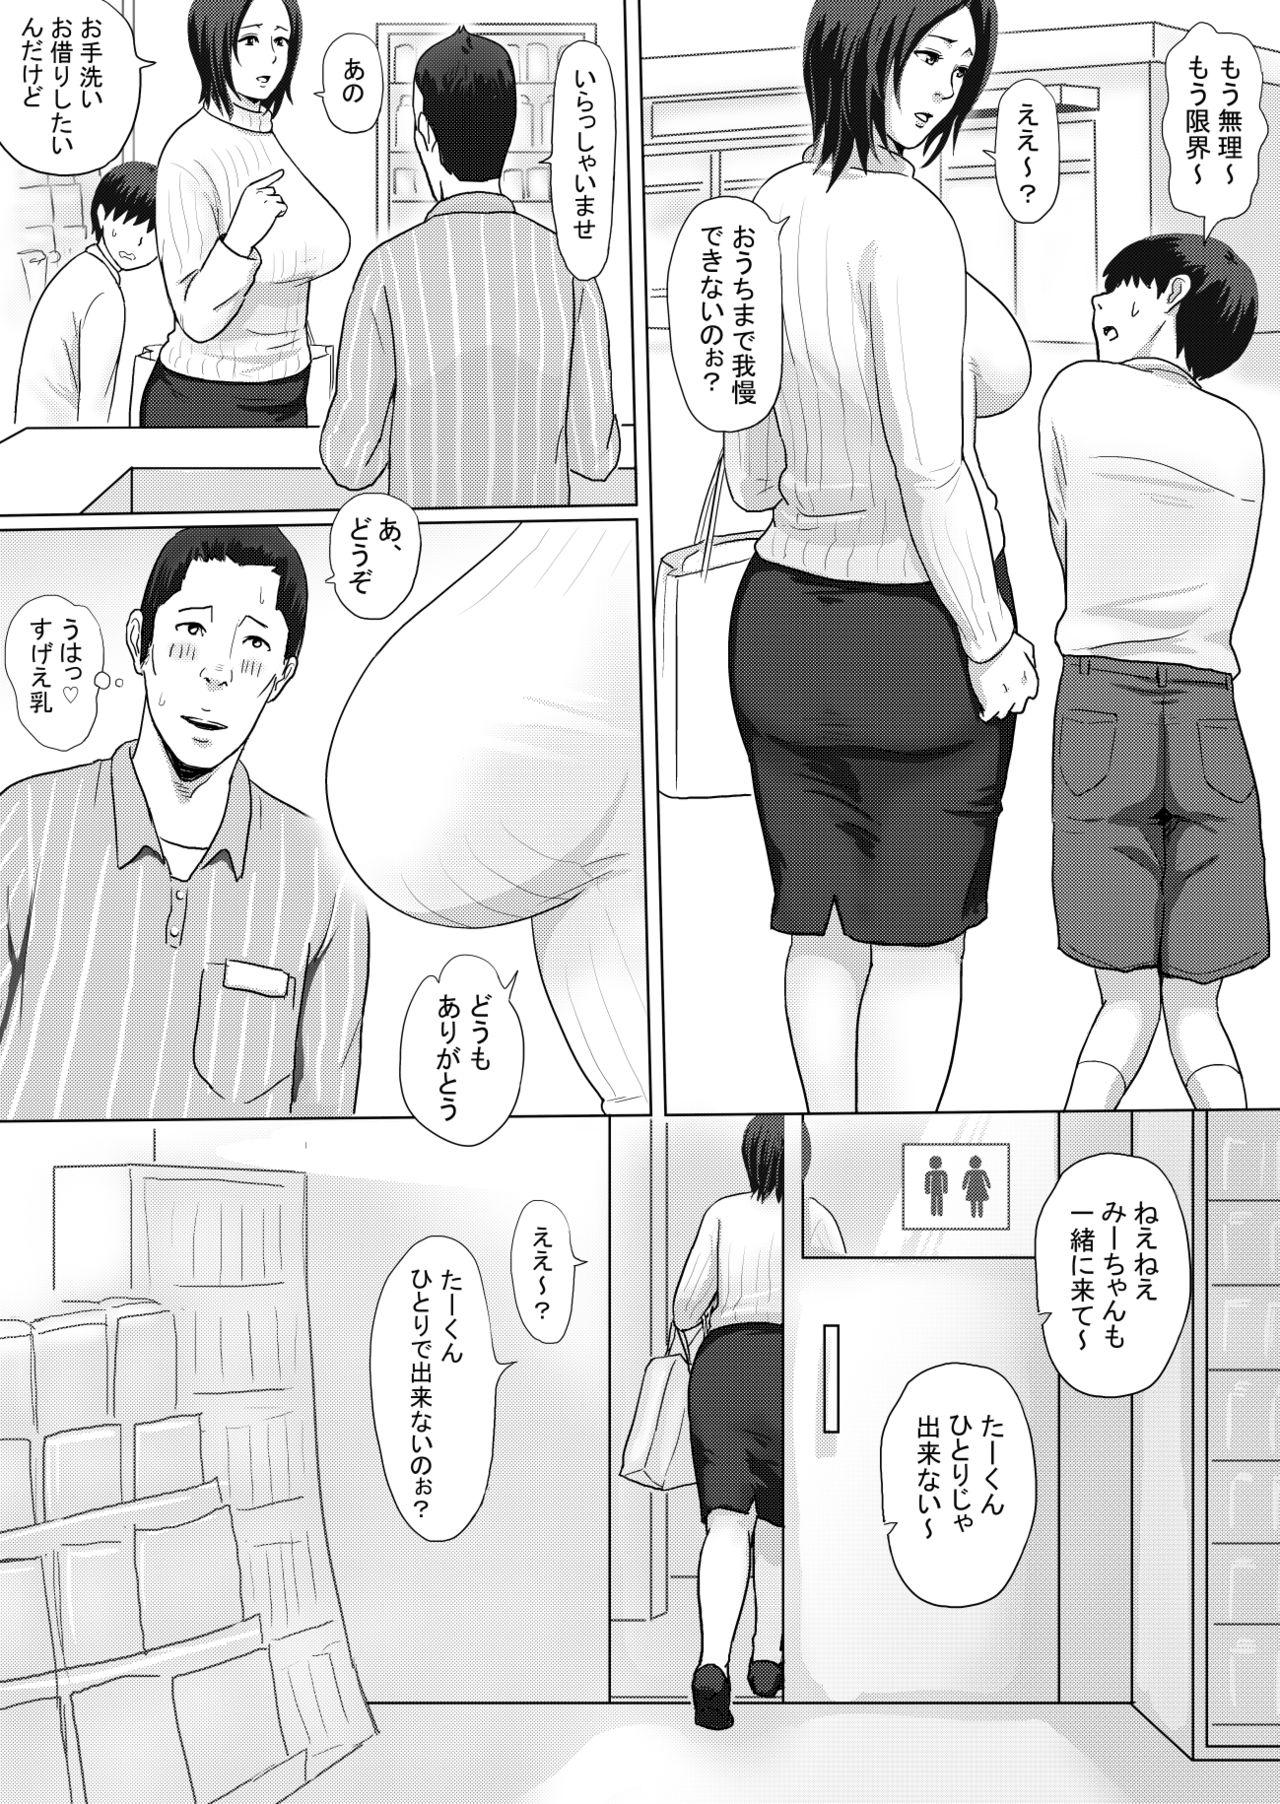 Ass Fuck みーちゃんとたーくん Amateur Porn - Page 13